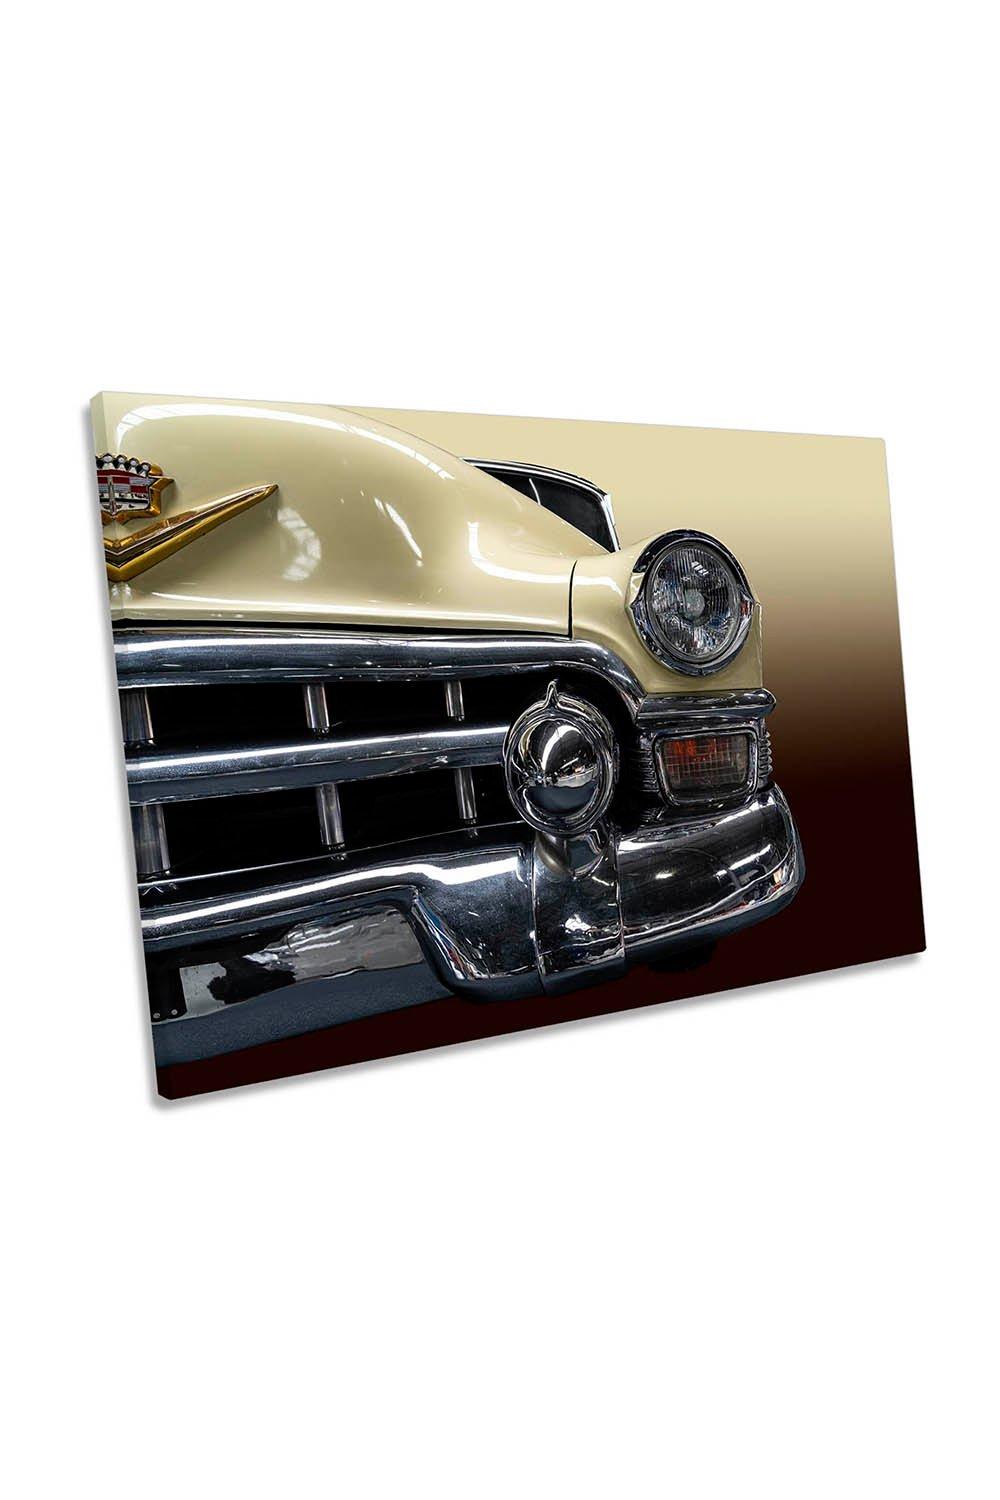 The Beige Cadillac Classic Car Canvas Wall Art Picture Print